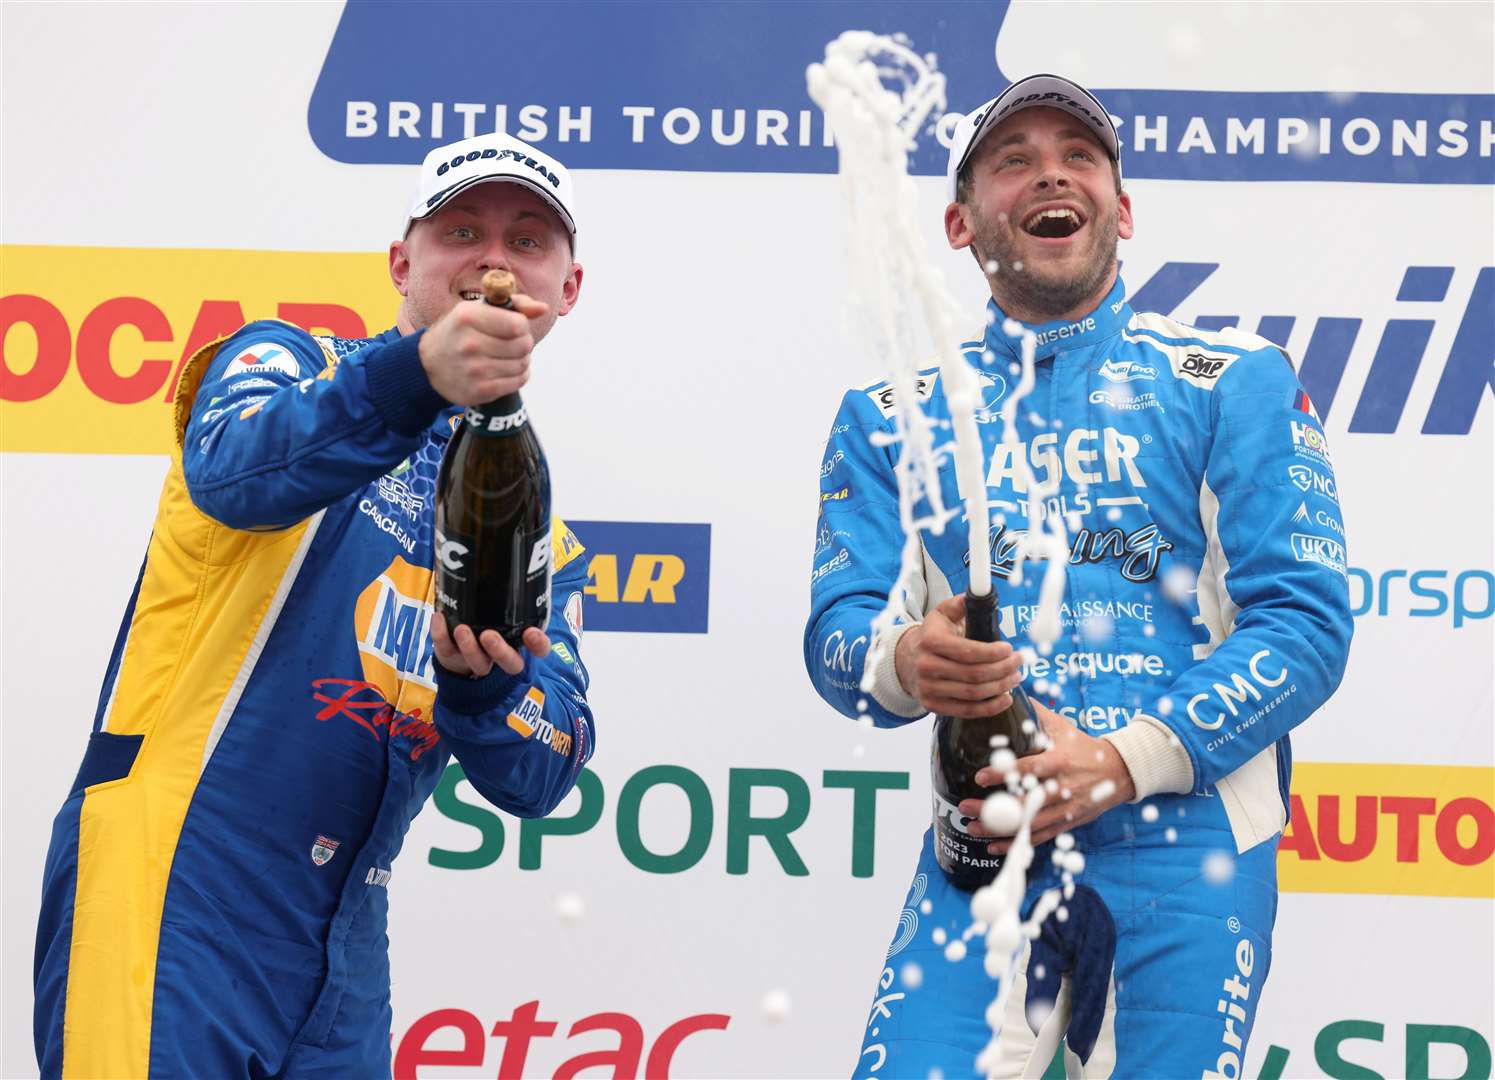 Jake Hill and Ash Sutton spray the champagne on the podium at Oulton Park. Picture: BTCC/Jakob Ebrey